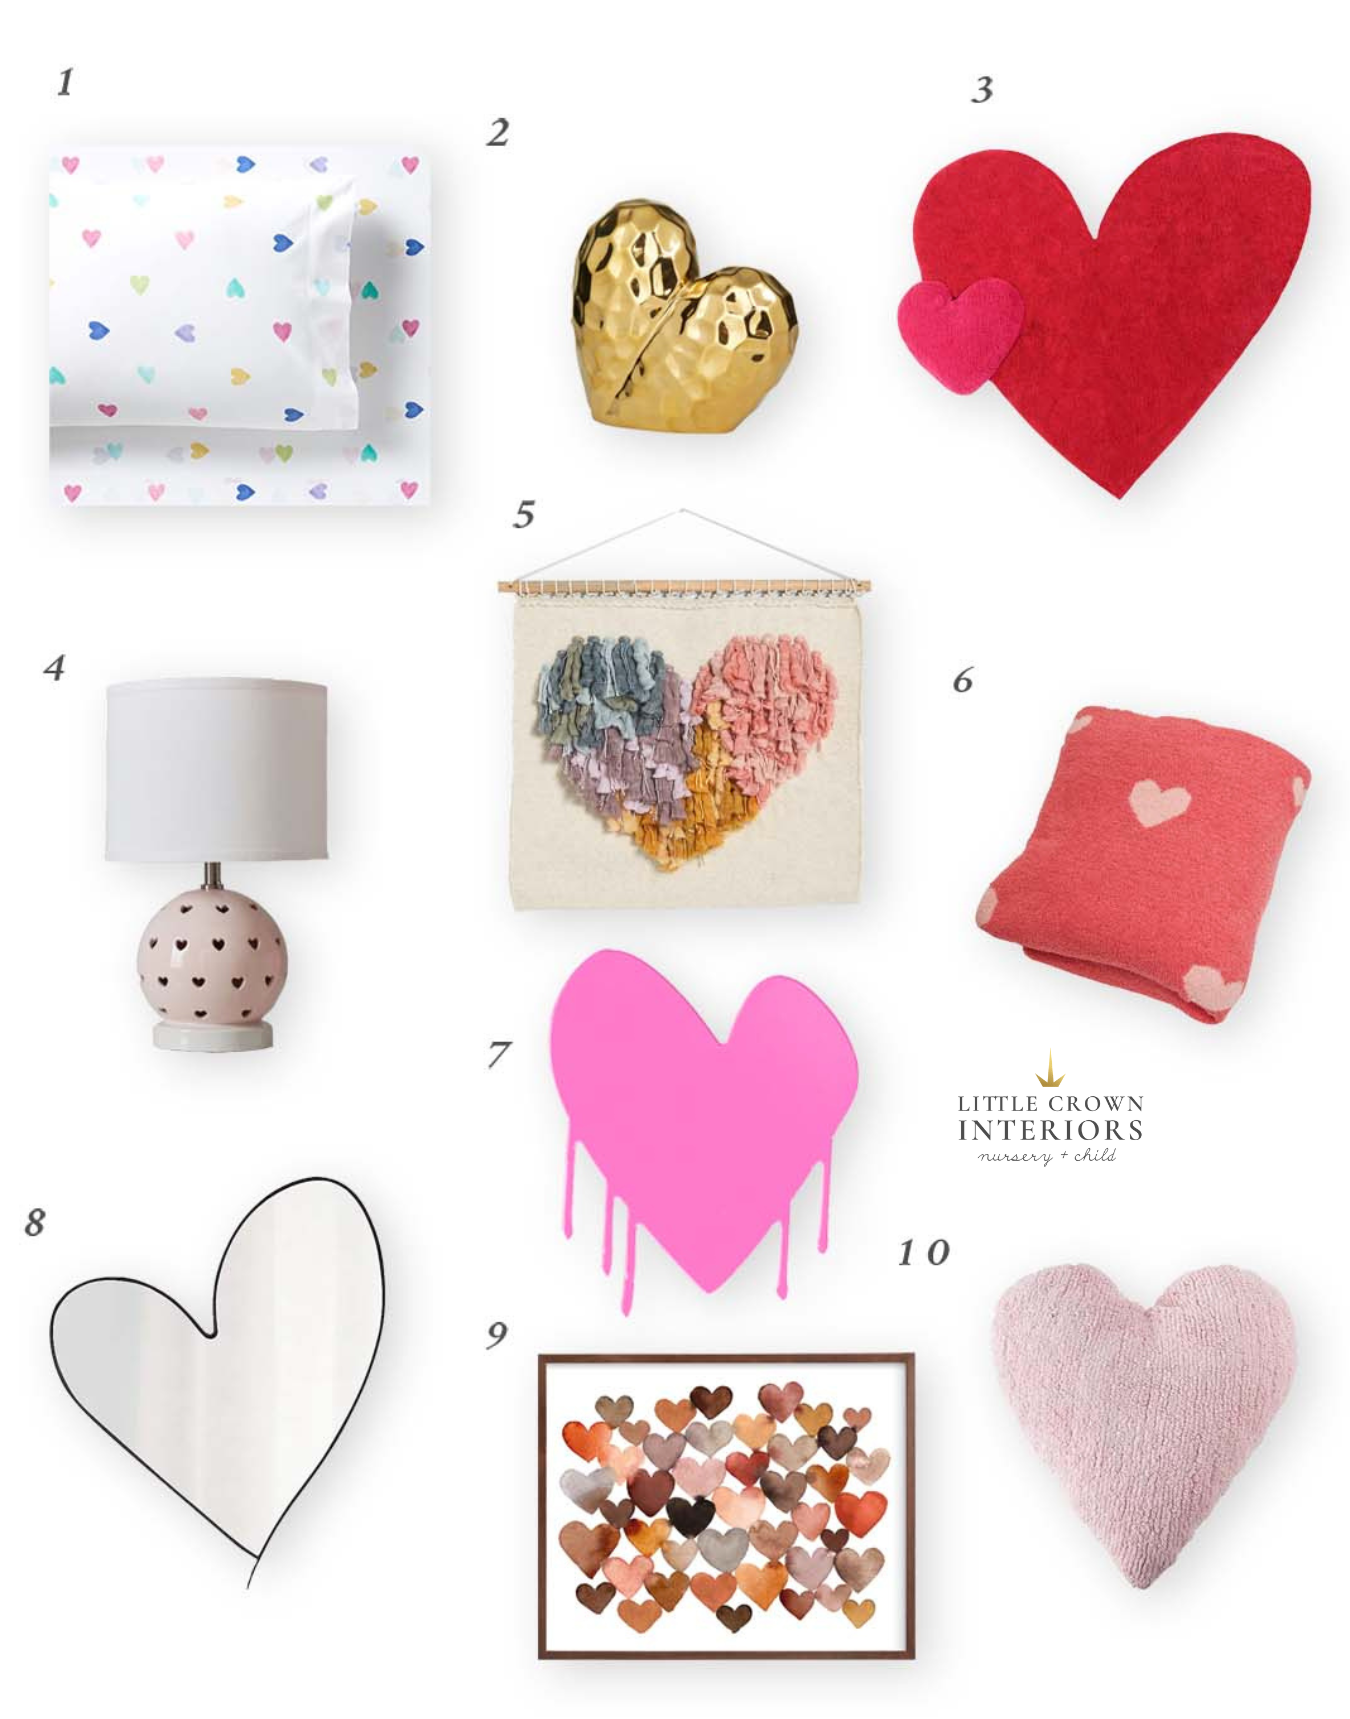 Adorable Heart Decor for the Nursery & Kid's Room - Little Crown Interiors